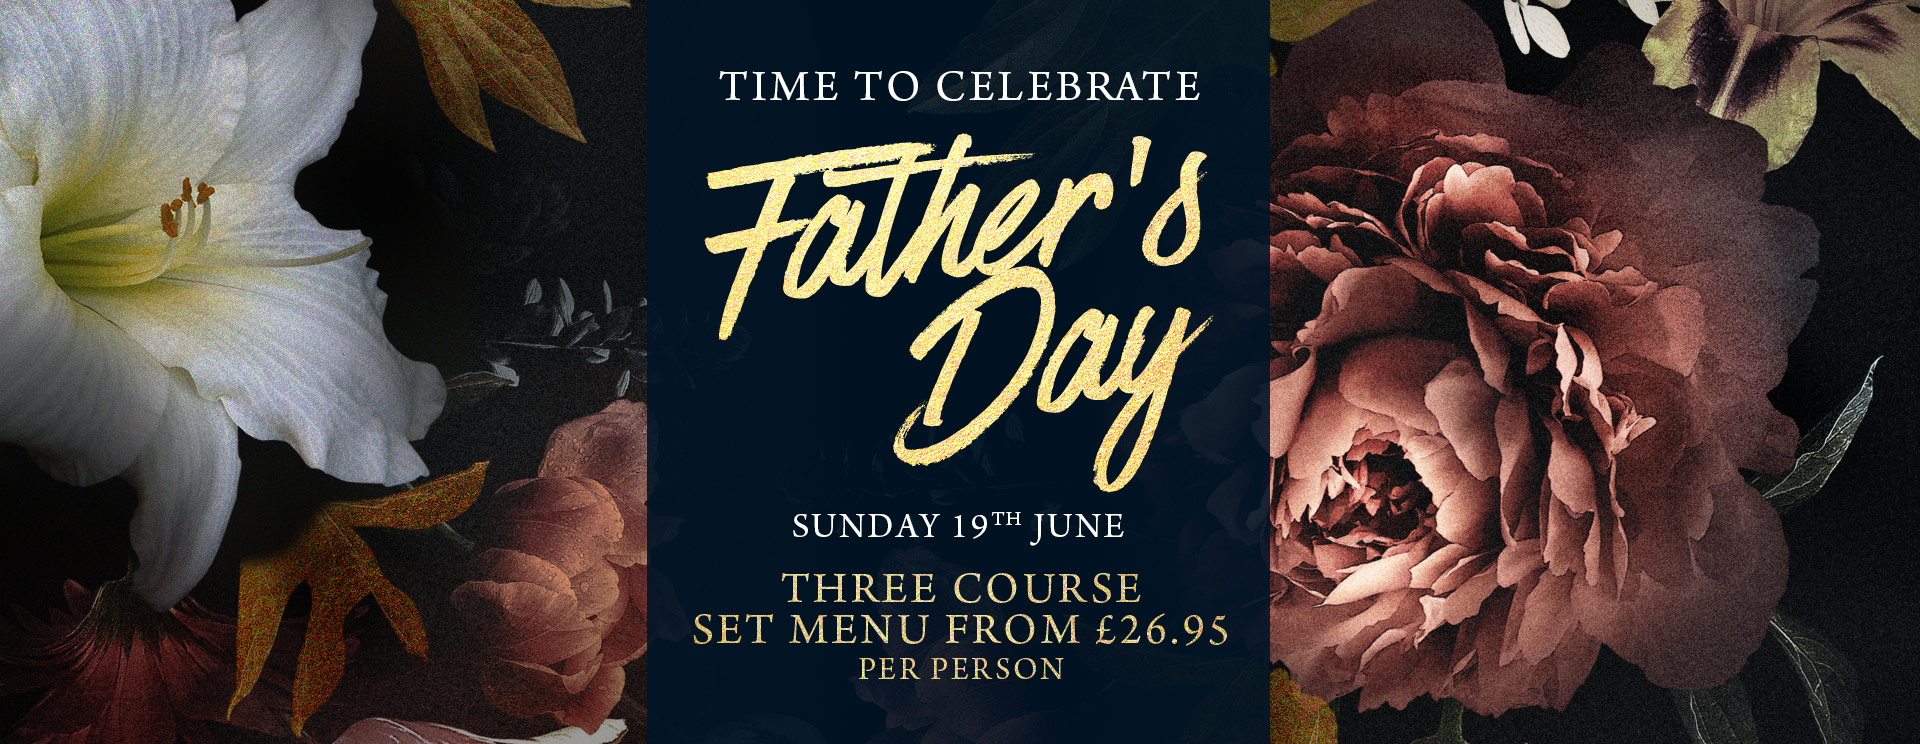 Fathers Day at The Ship Inn